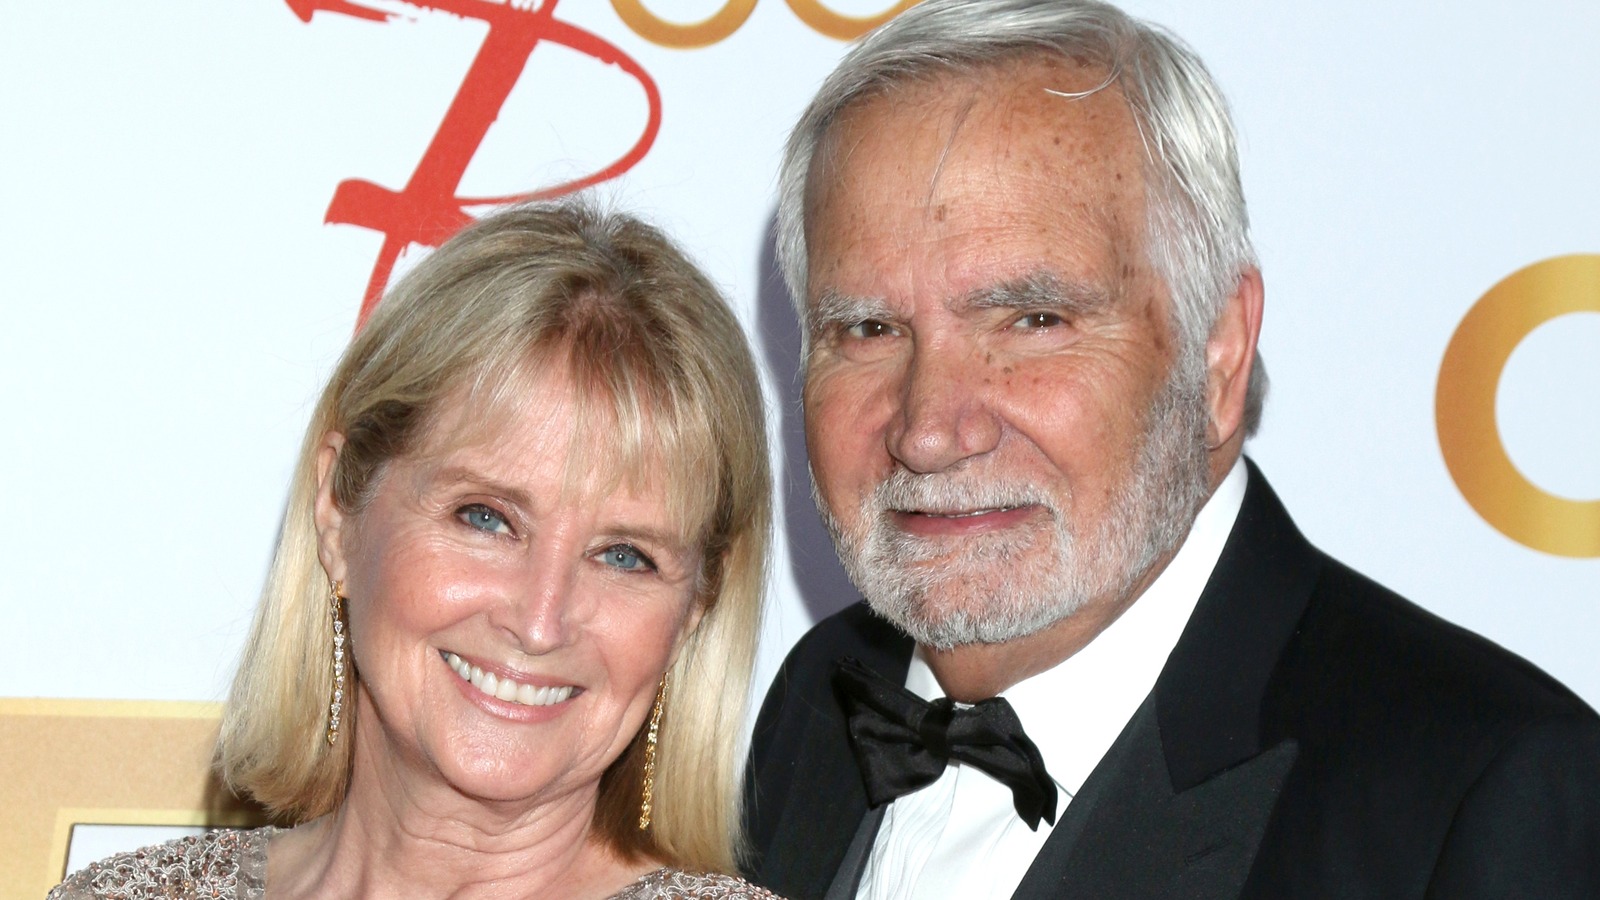 Who Is The Bold And The Beautiful's John McCook Married To In Real Life?